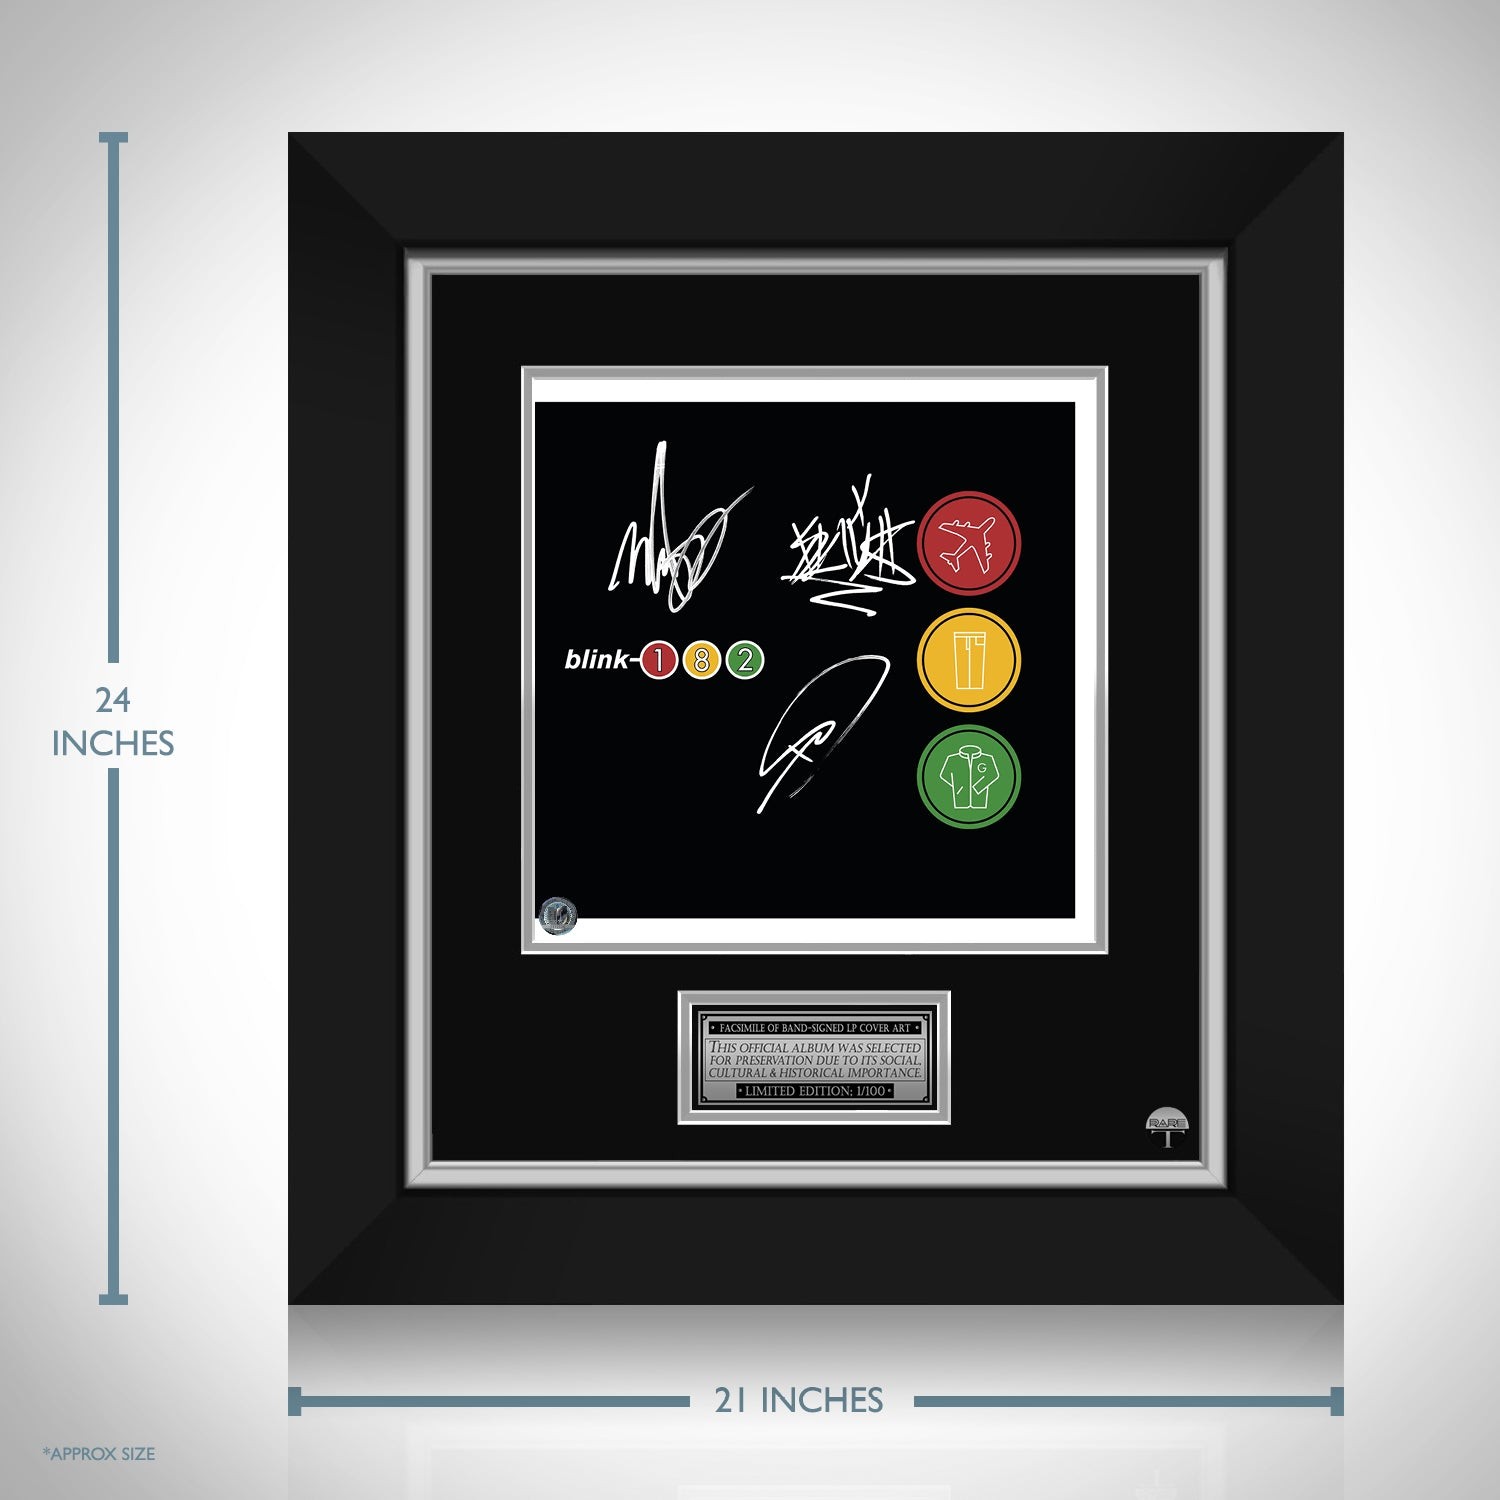 Blink-182 - Take Off Your Pants and Jacket LP Cover Limited Signature  Edition Custom Frame